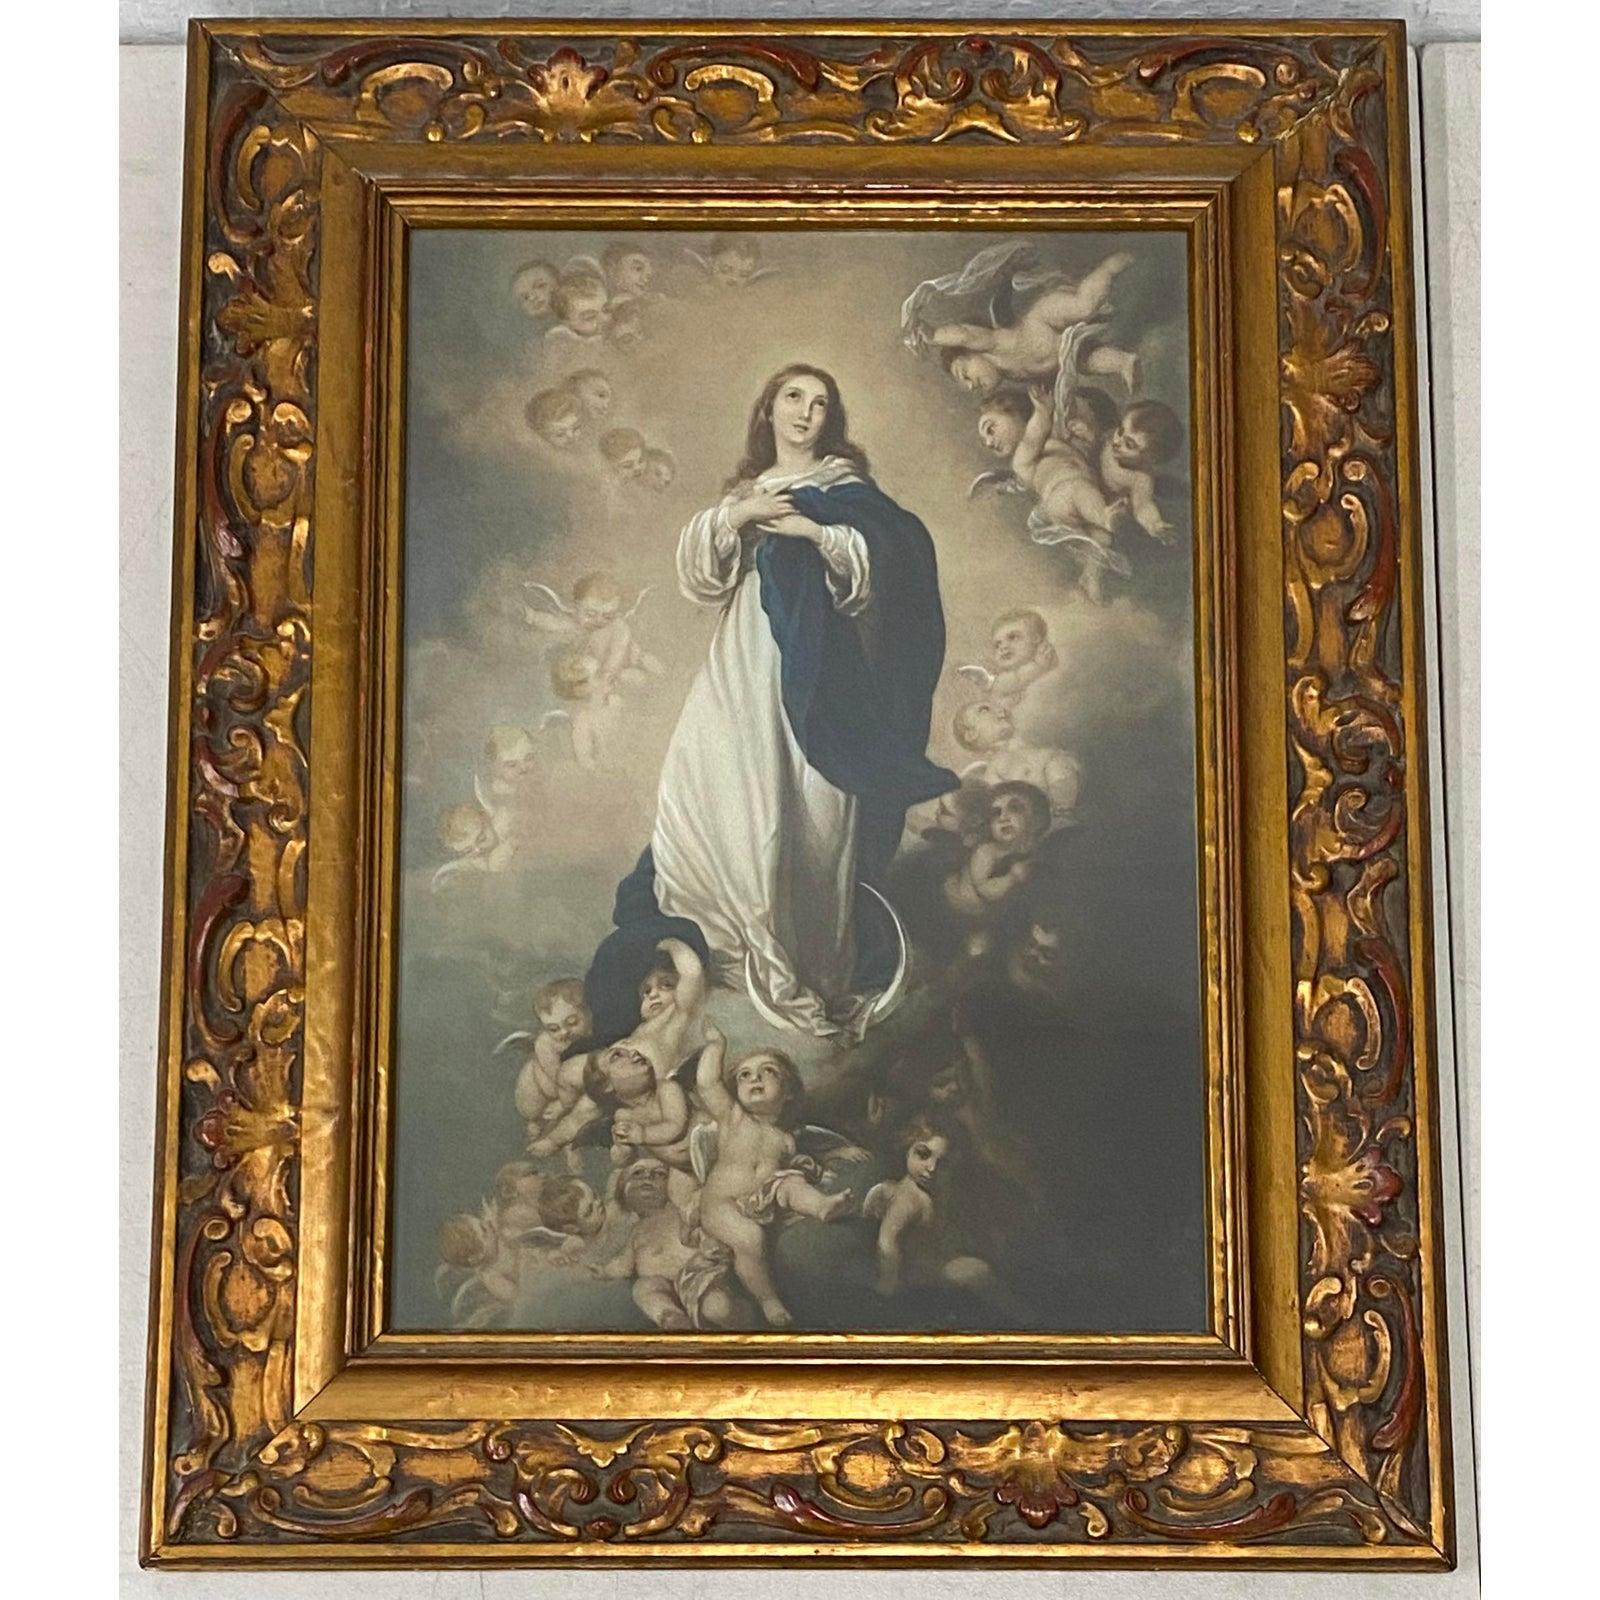 Unknown Portrait Print - Early 20th Century "Assumption of Mary" Colored Chromolithograph